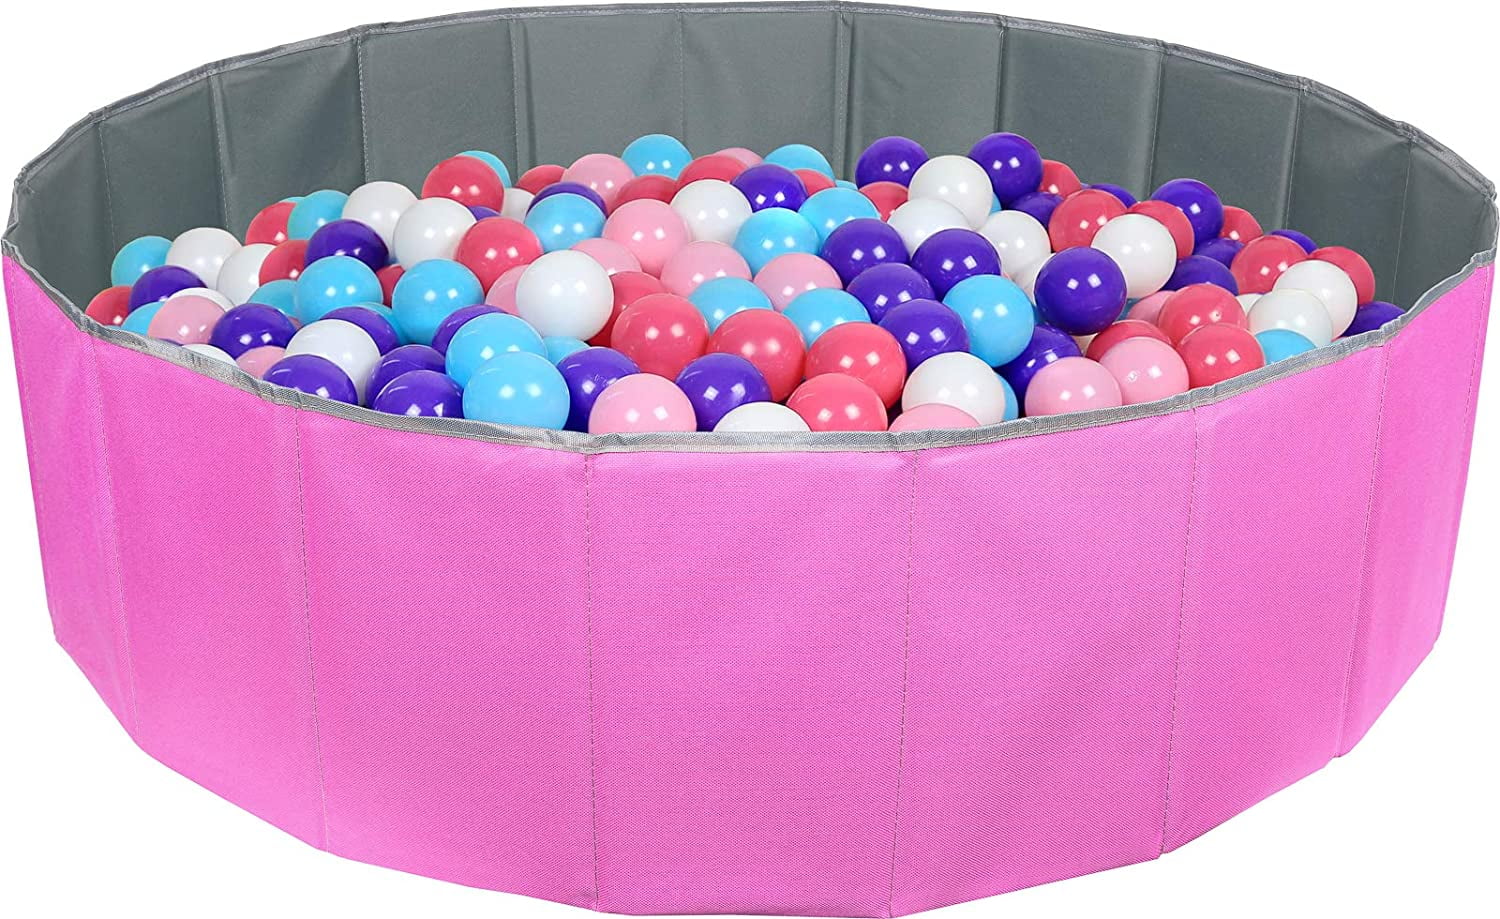 500 KIDS CHILDRENS PLASTIC PLAY BALLS BALL PITS PEN POOL MULTICOLOURED TOY SOFT 